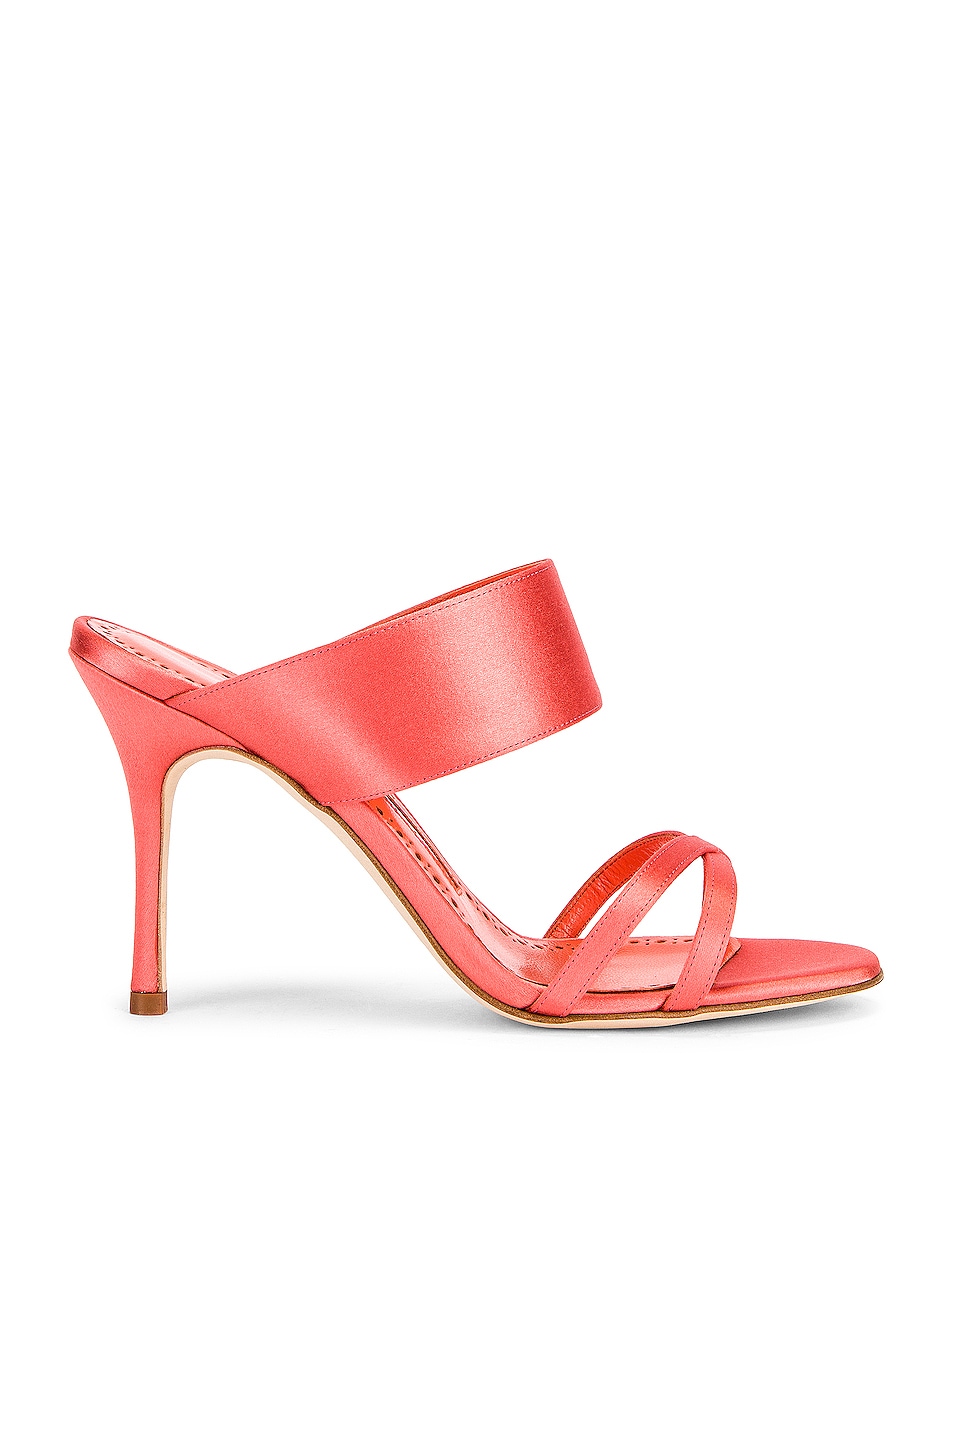 Image 1 of Manolo Blahnik Gueypla 90 Sandal in Bright Coral